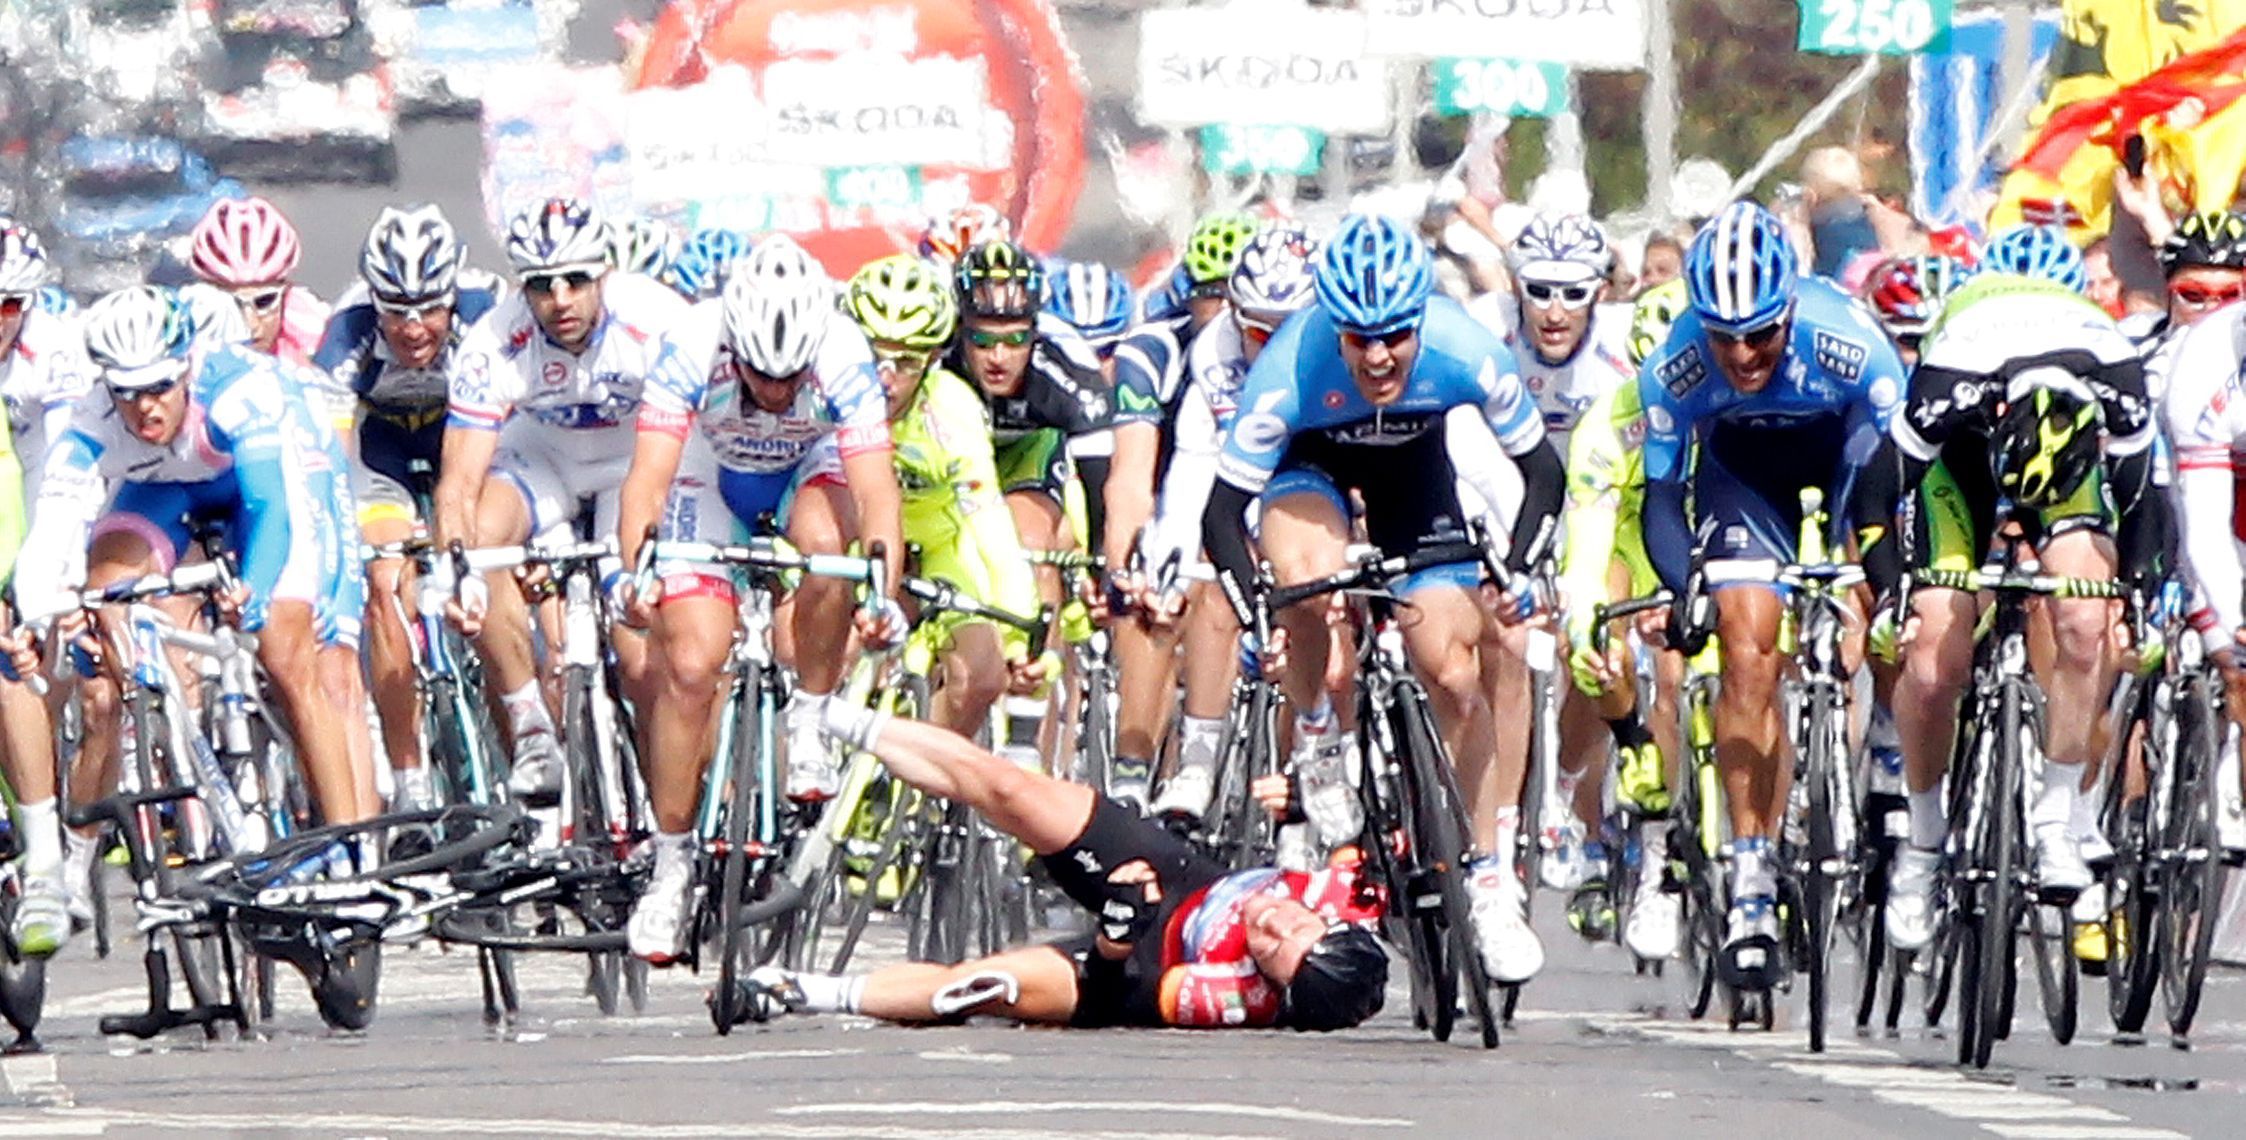 FILE PHOTO: Team Sky rider Mark Cavendish crashes during the final rush of the 190-km third stage of the Giro d'Italia in Horsens, Denmark.